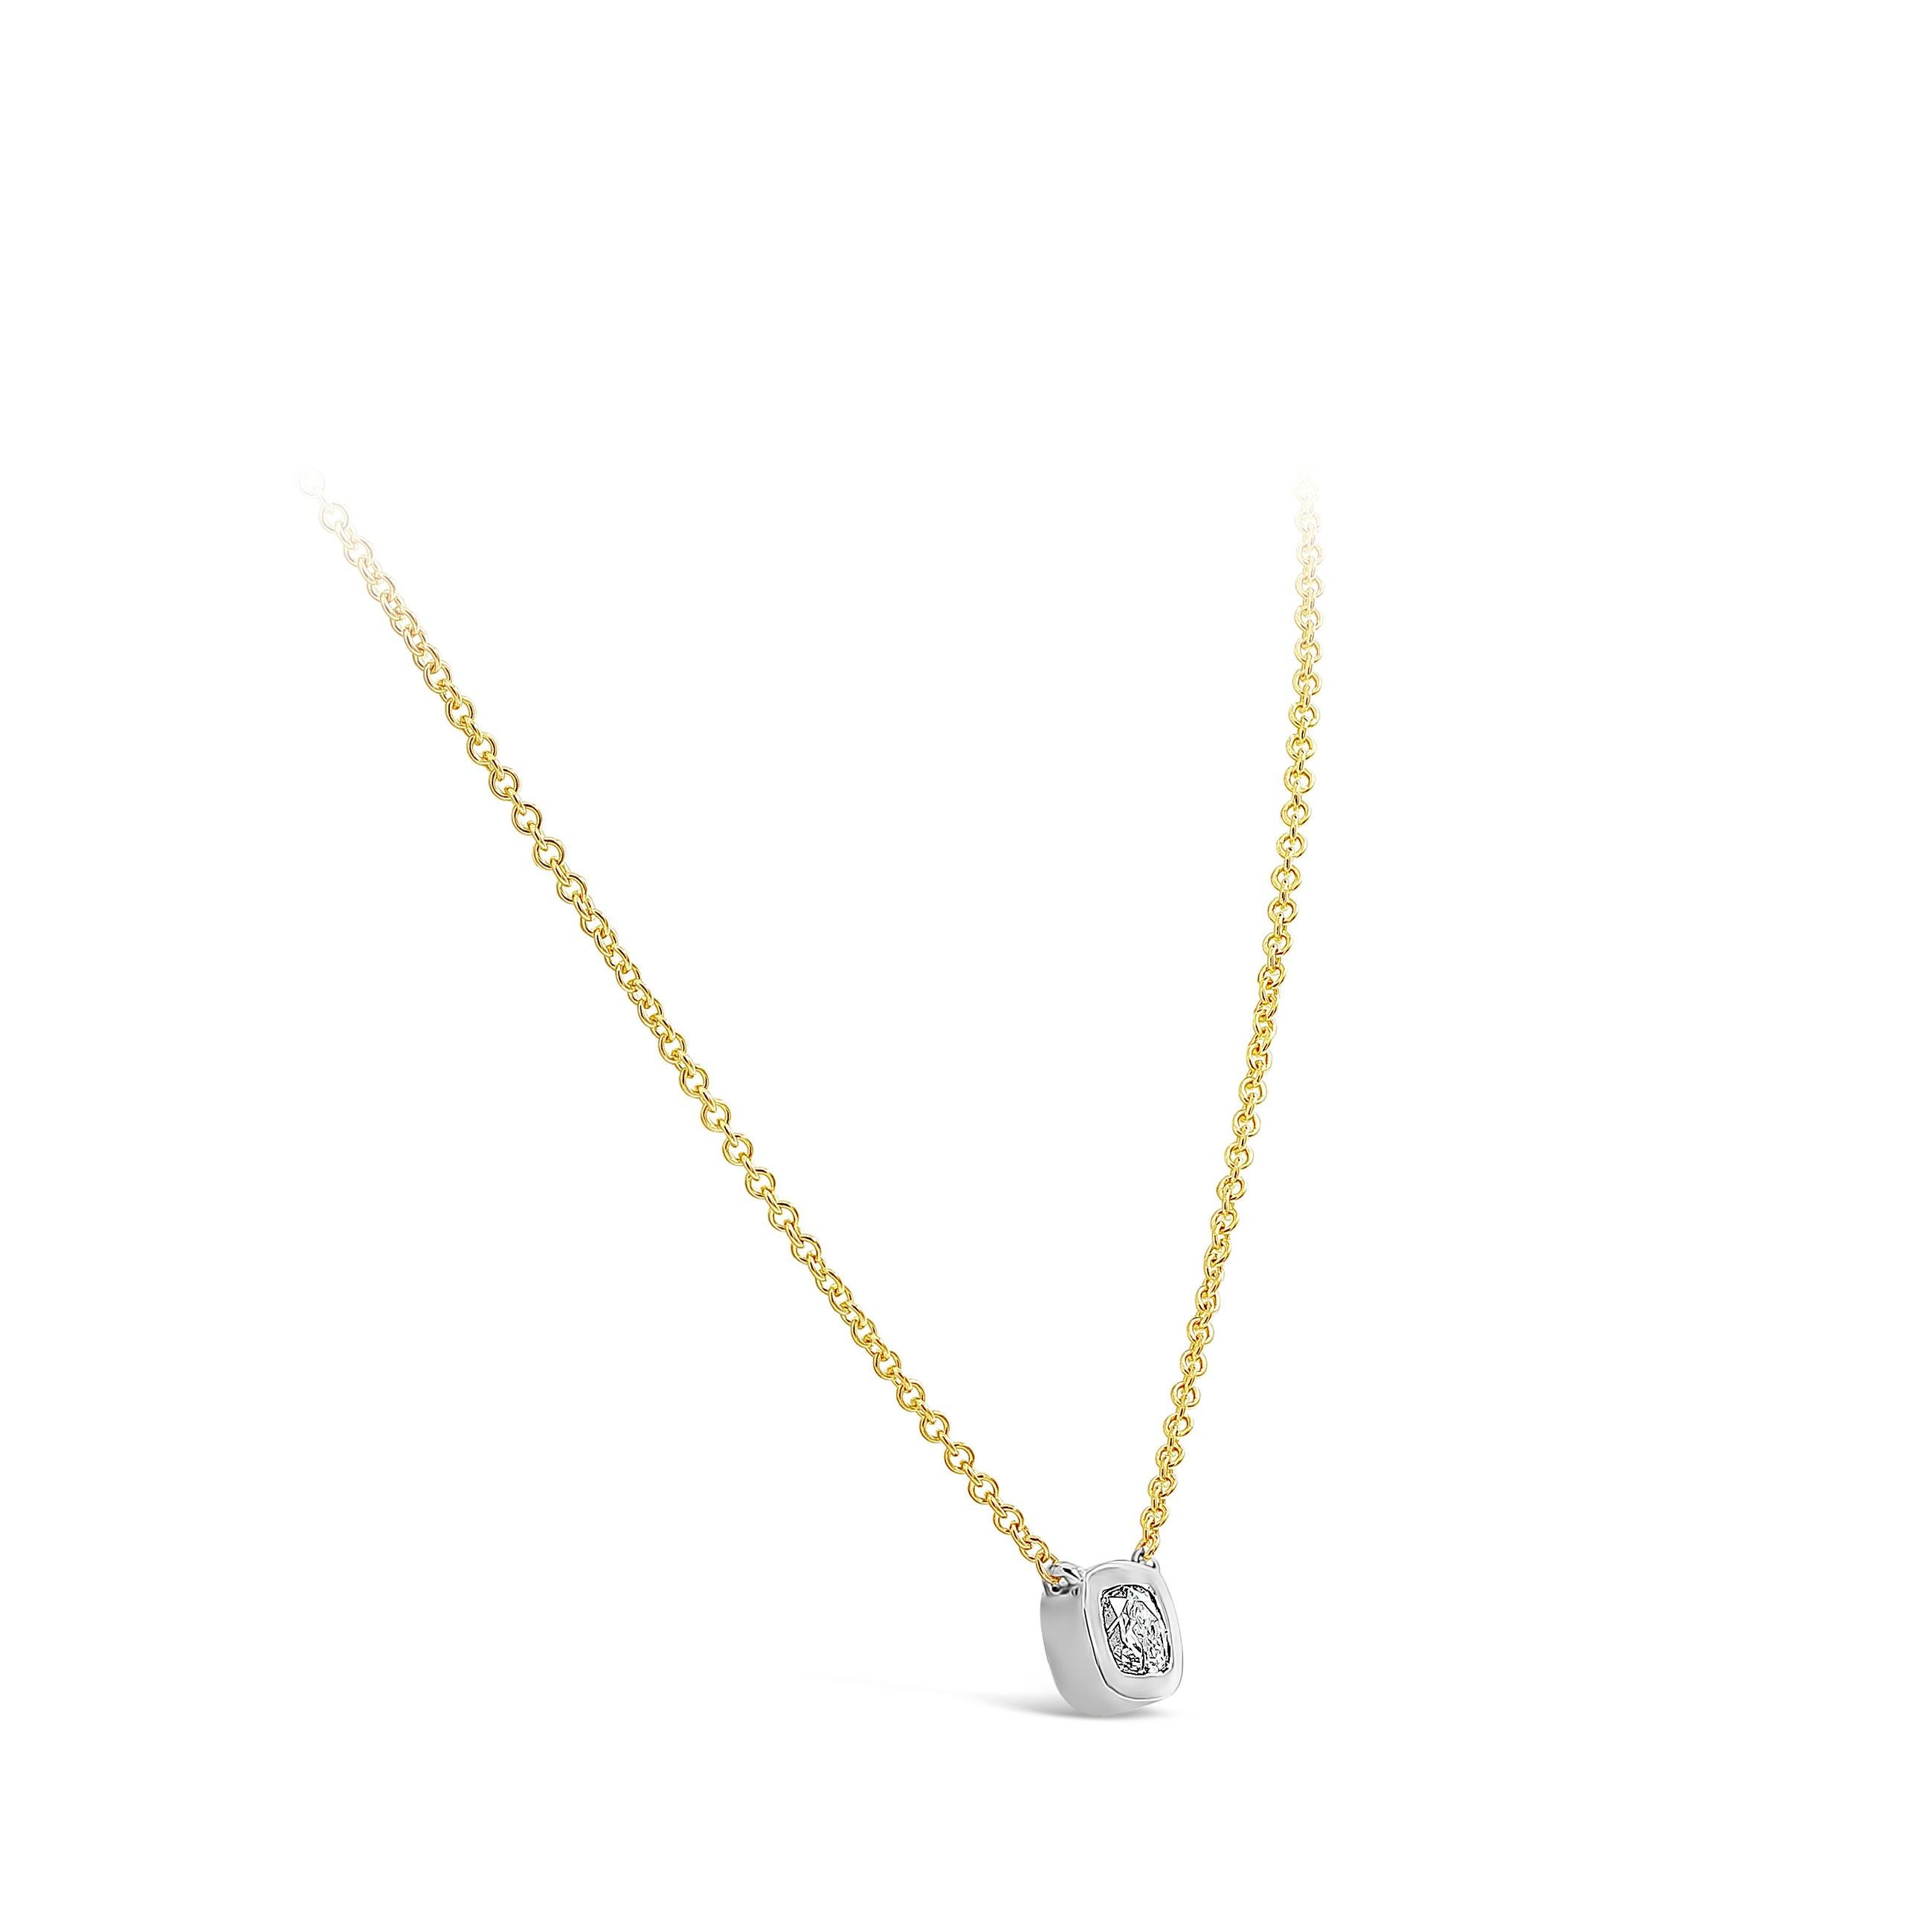 A simple pendant necklace showcasing a GIA Certified 0.77 carat cushion cut diamond, E Color and SI2 in Clarity. Bezel set in a 14K White Gold, suspended on a 14K Yellow Gold chain. 16 inches in Length. 

Roman Malakov is a custom house,